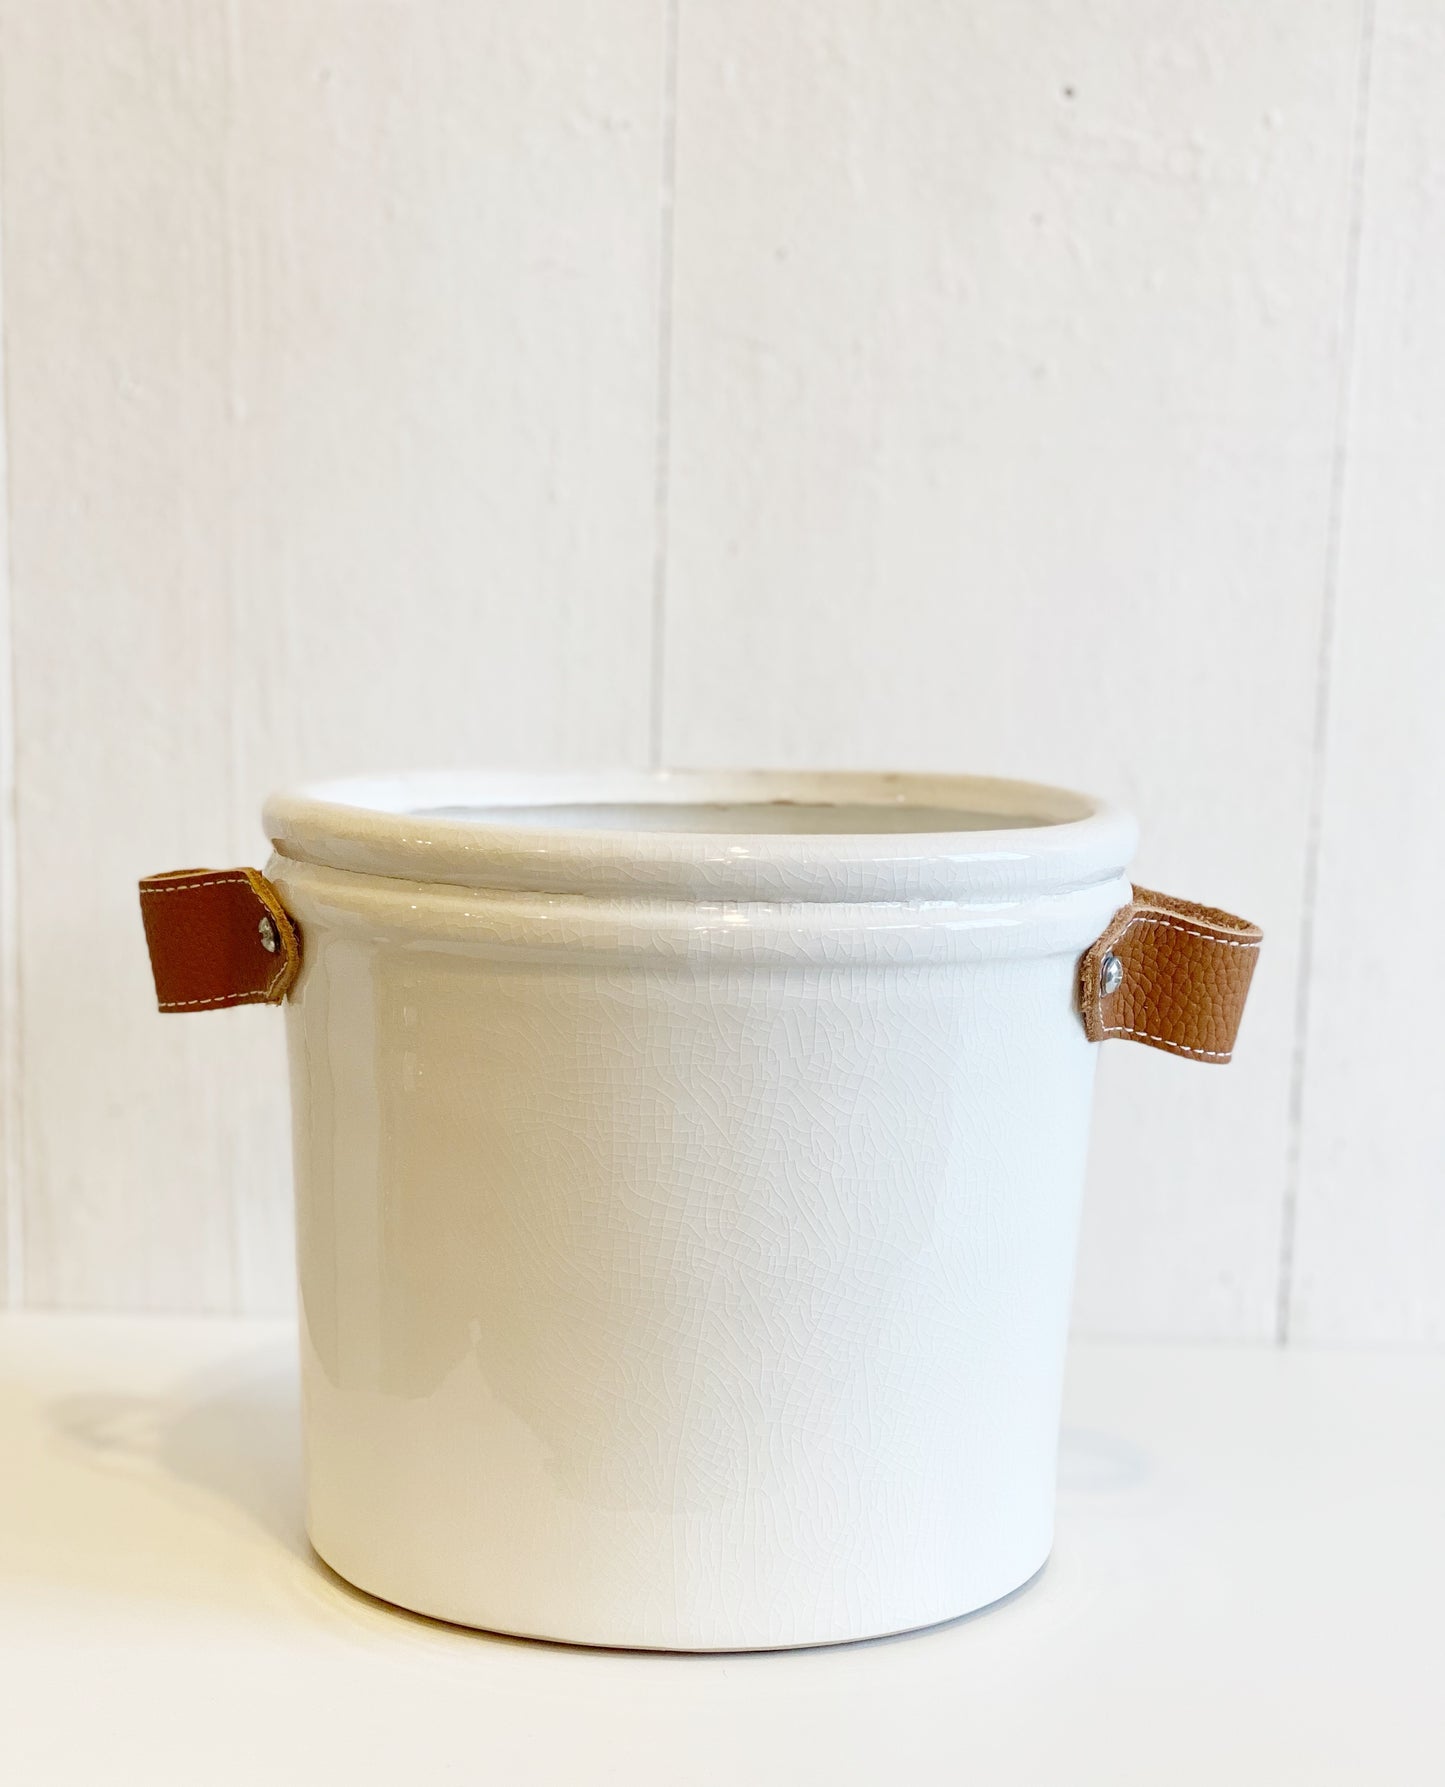 Pottery - Crock With Leather Handles